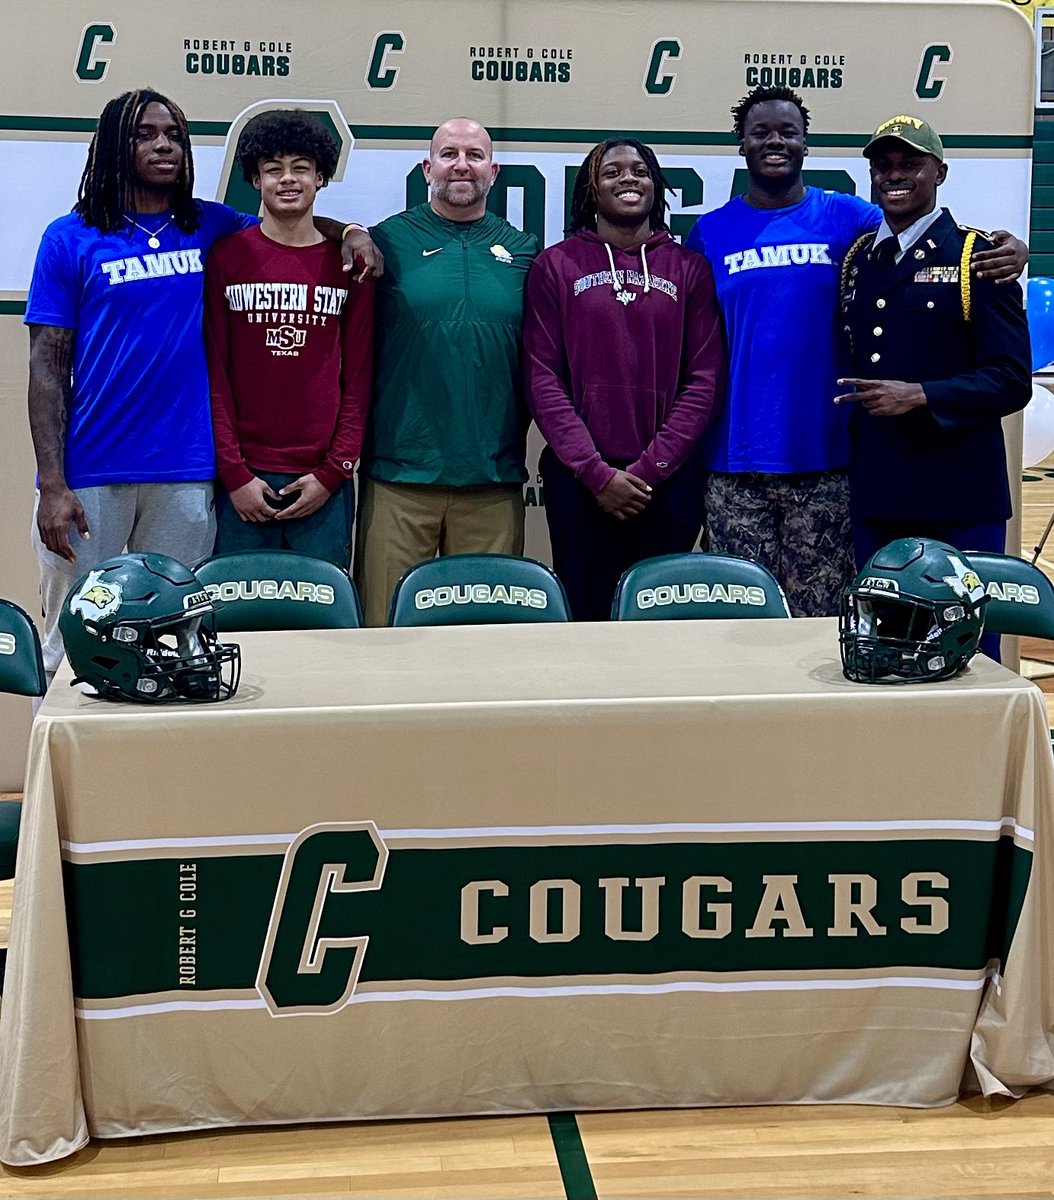 Great day on the Installation @JBSA_Official at @RGC_MS_HS! We had a great ceremony with 5 of our @RGC_Football players signing their NLI to play football at the next level. Hard work pays off! Can’t wait to see what the future holds for these young men! Love y’all